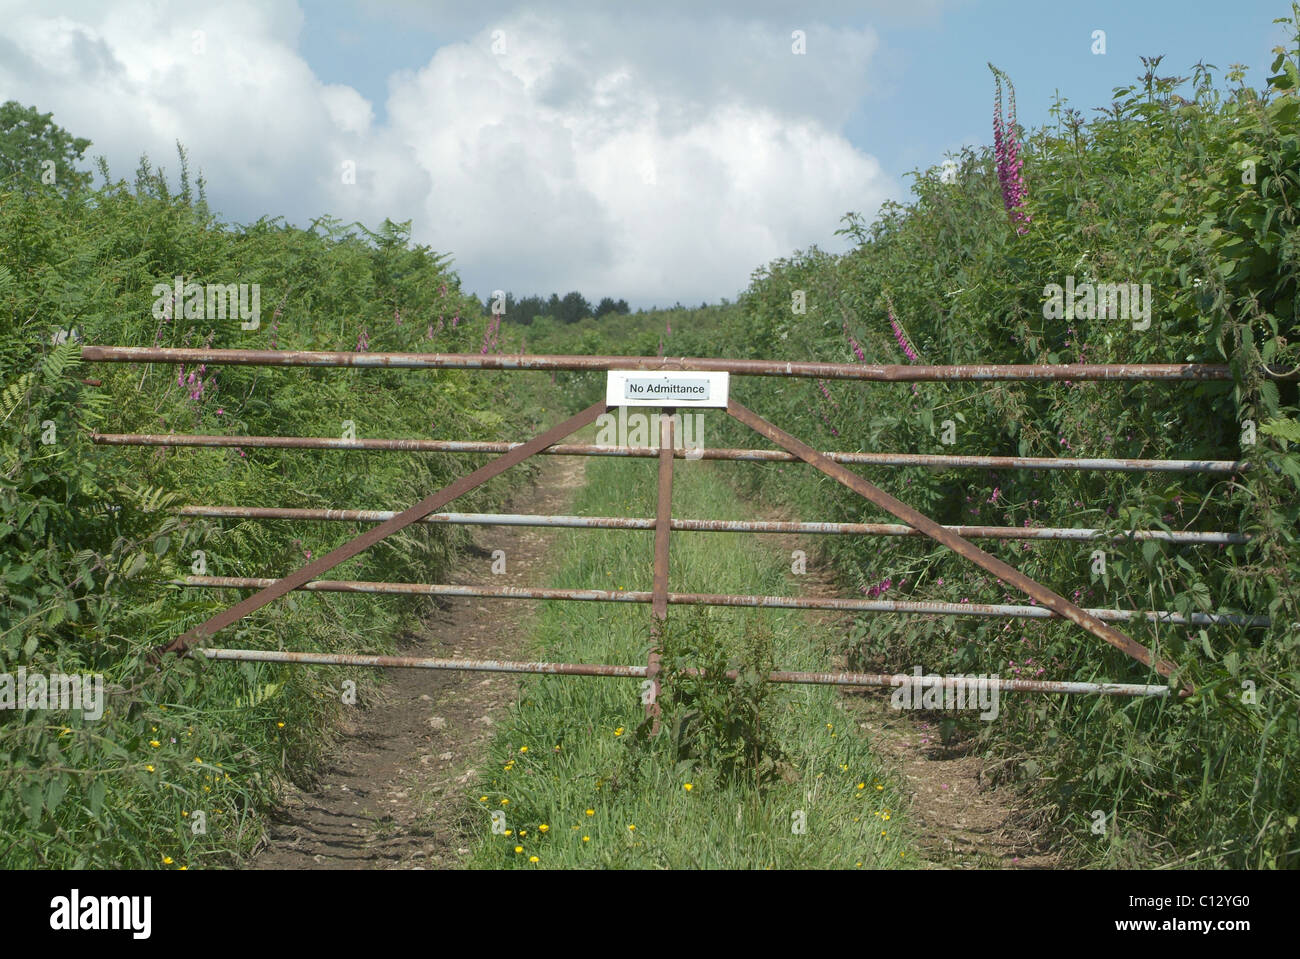 No admittance sign on a farm gate Stock Photo